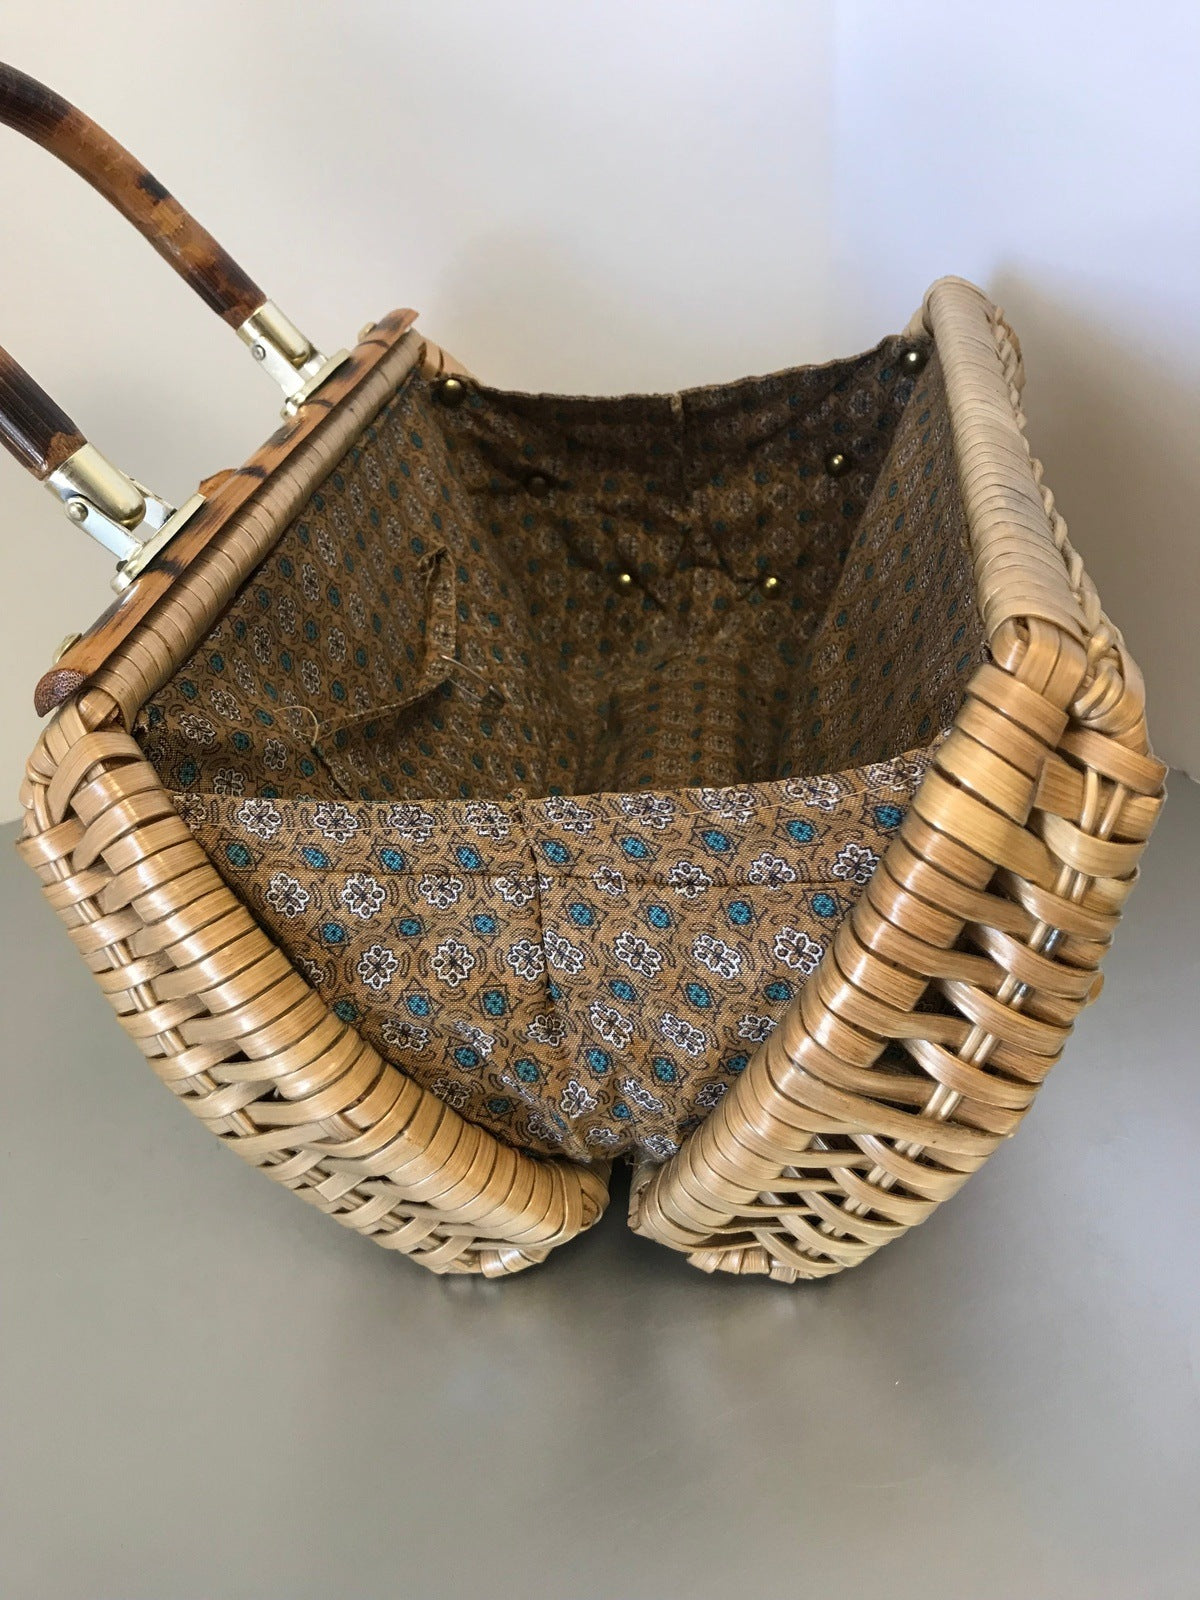 500 Basket Bags for Every Style, Under $100 & One of a Kind | Bags, Basket  bag, Wicker bags